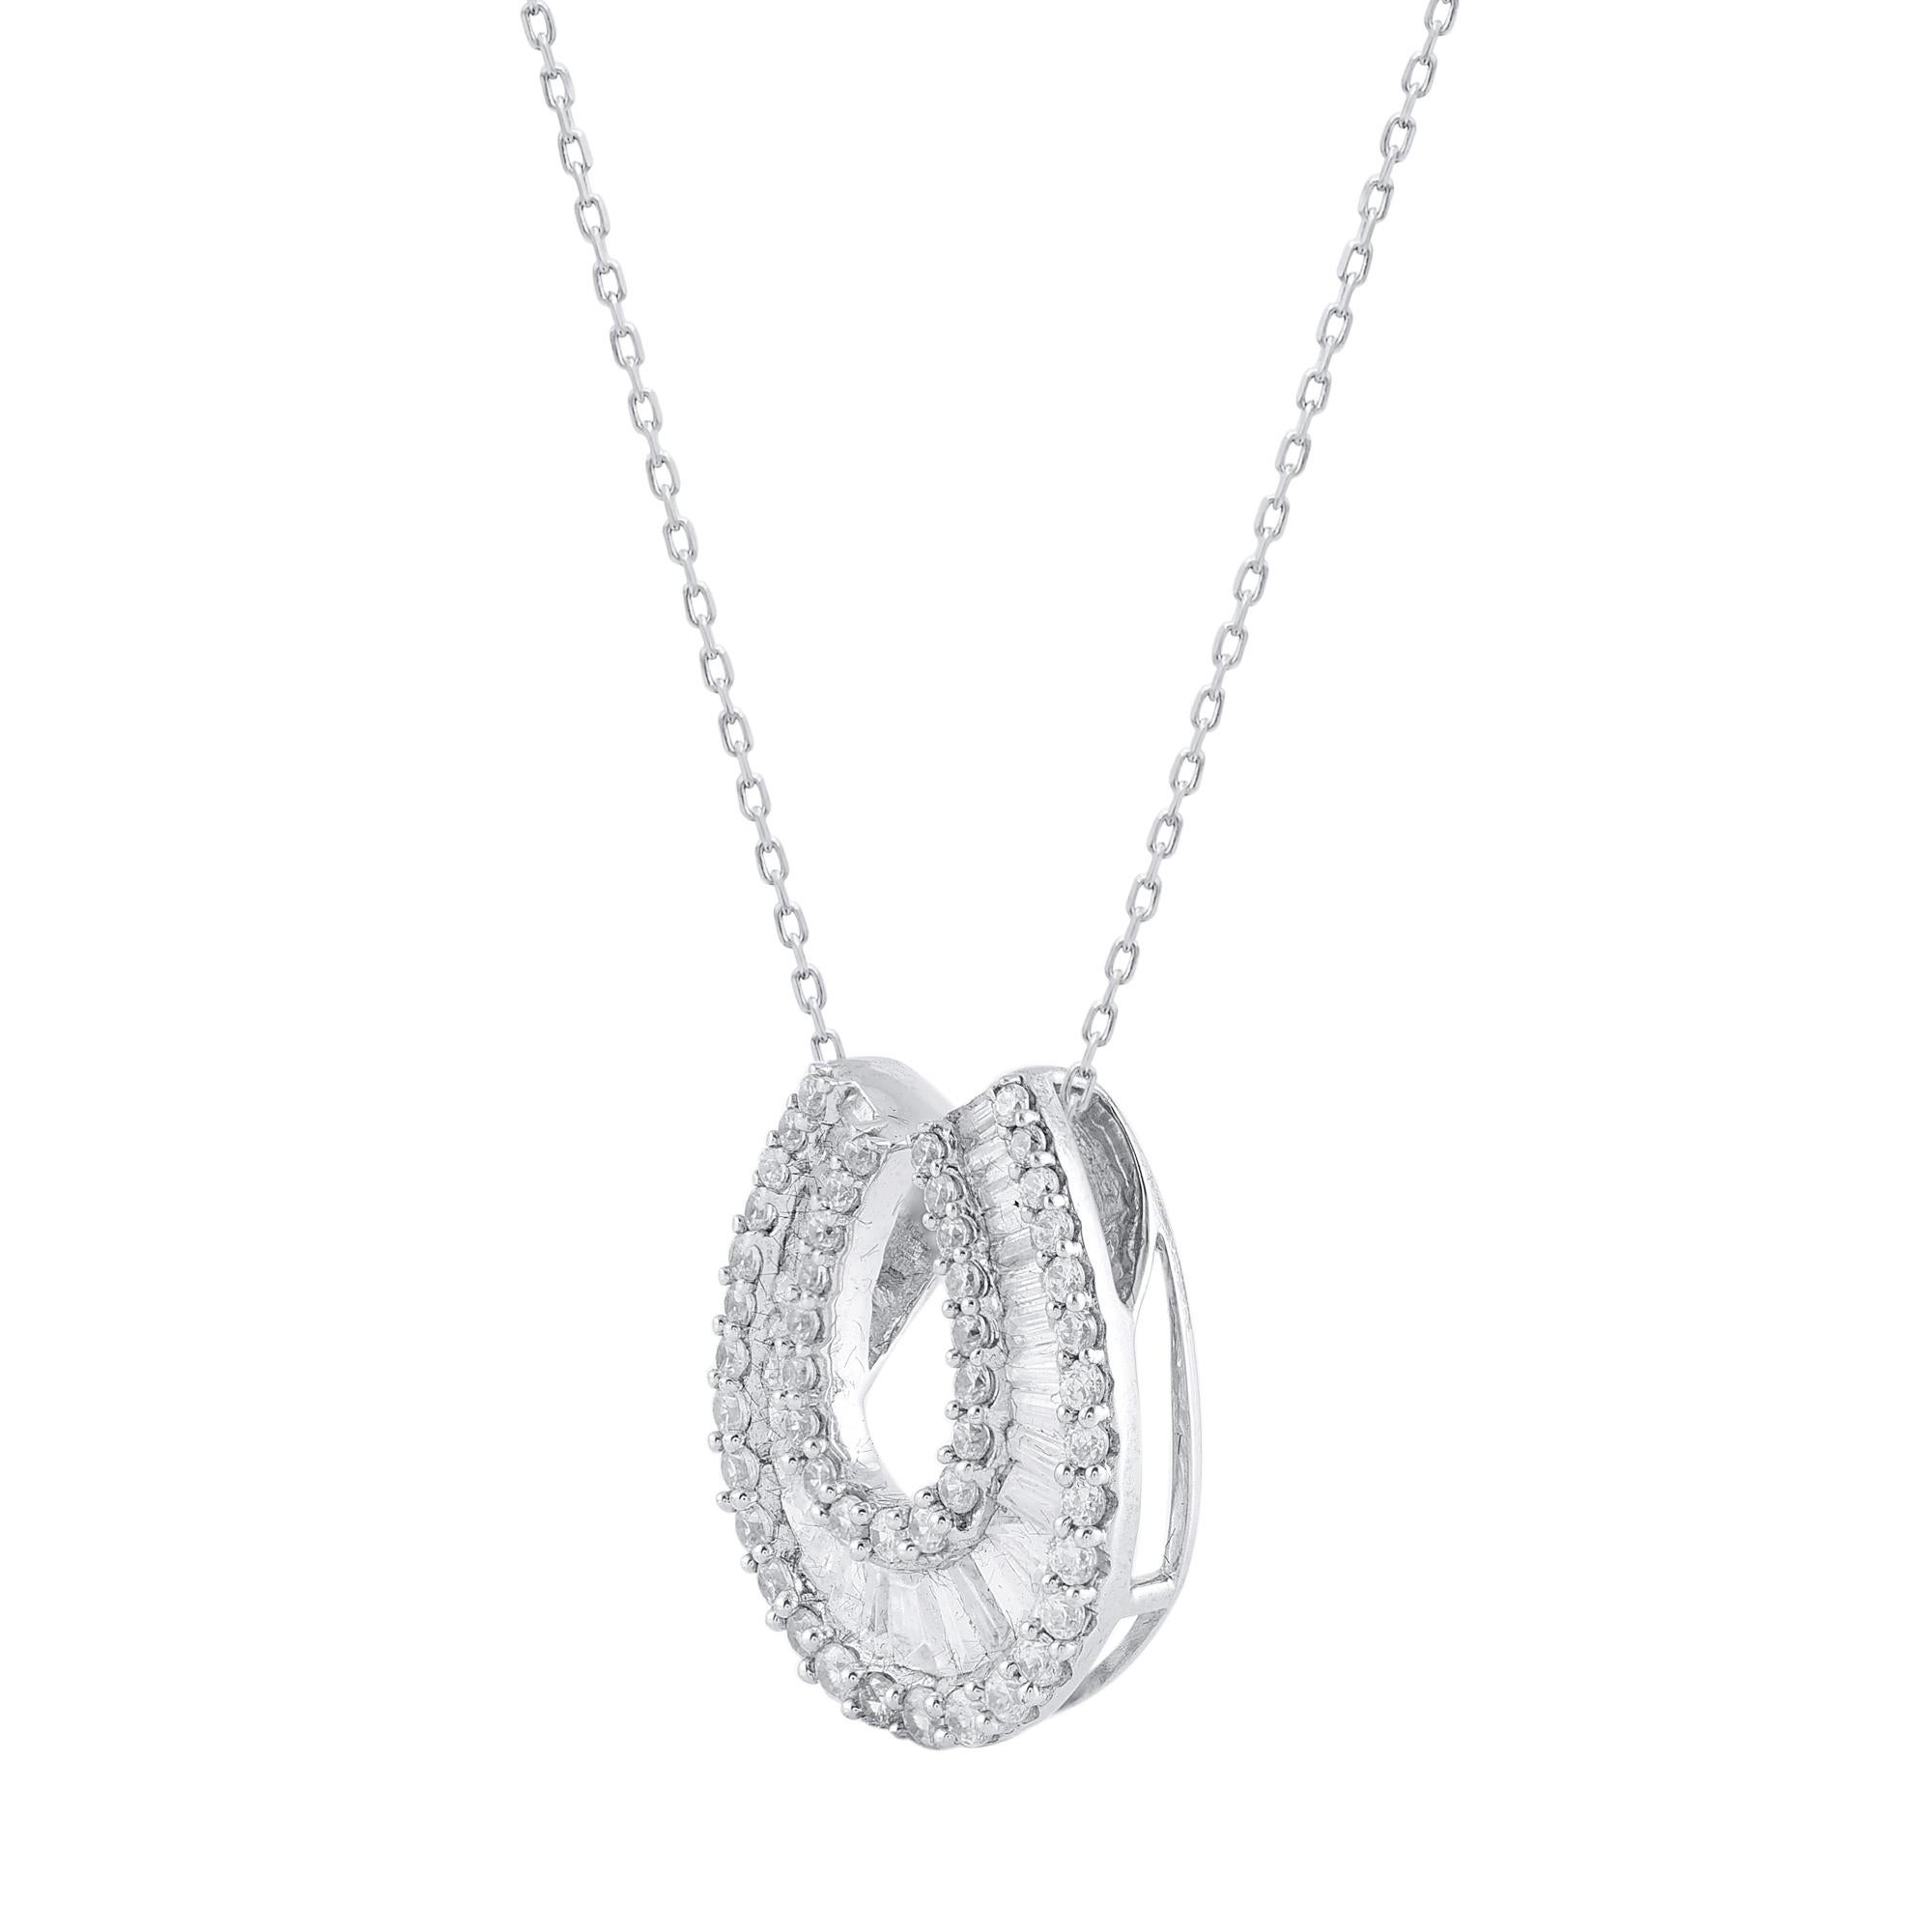 Make a bold statement of style and beliefs with the eye-catching elegance of this diamond pendant.  Beautifully crafted by our inhouse experts in 14 karat white gold and embellished with 75 round brilliant cut & baguette diamond set in prong and